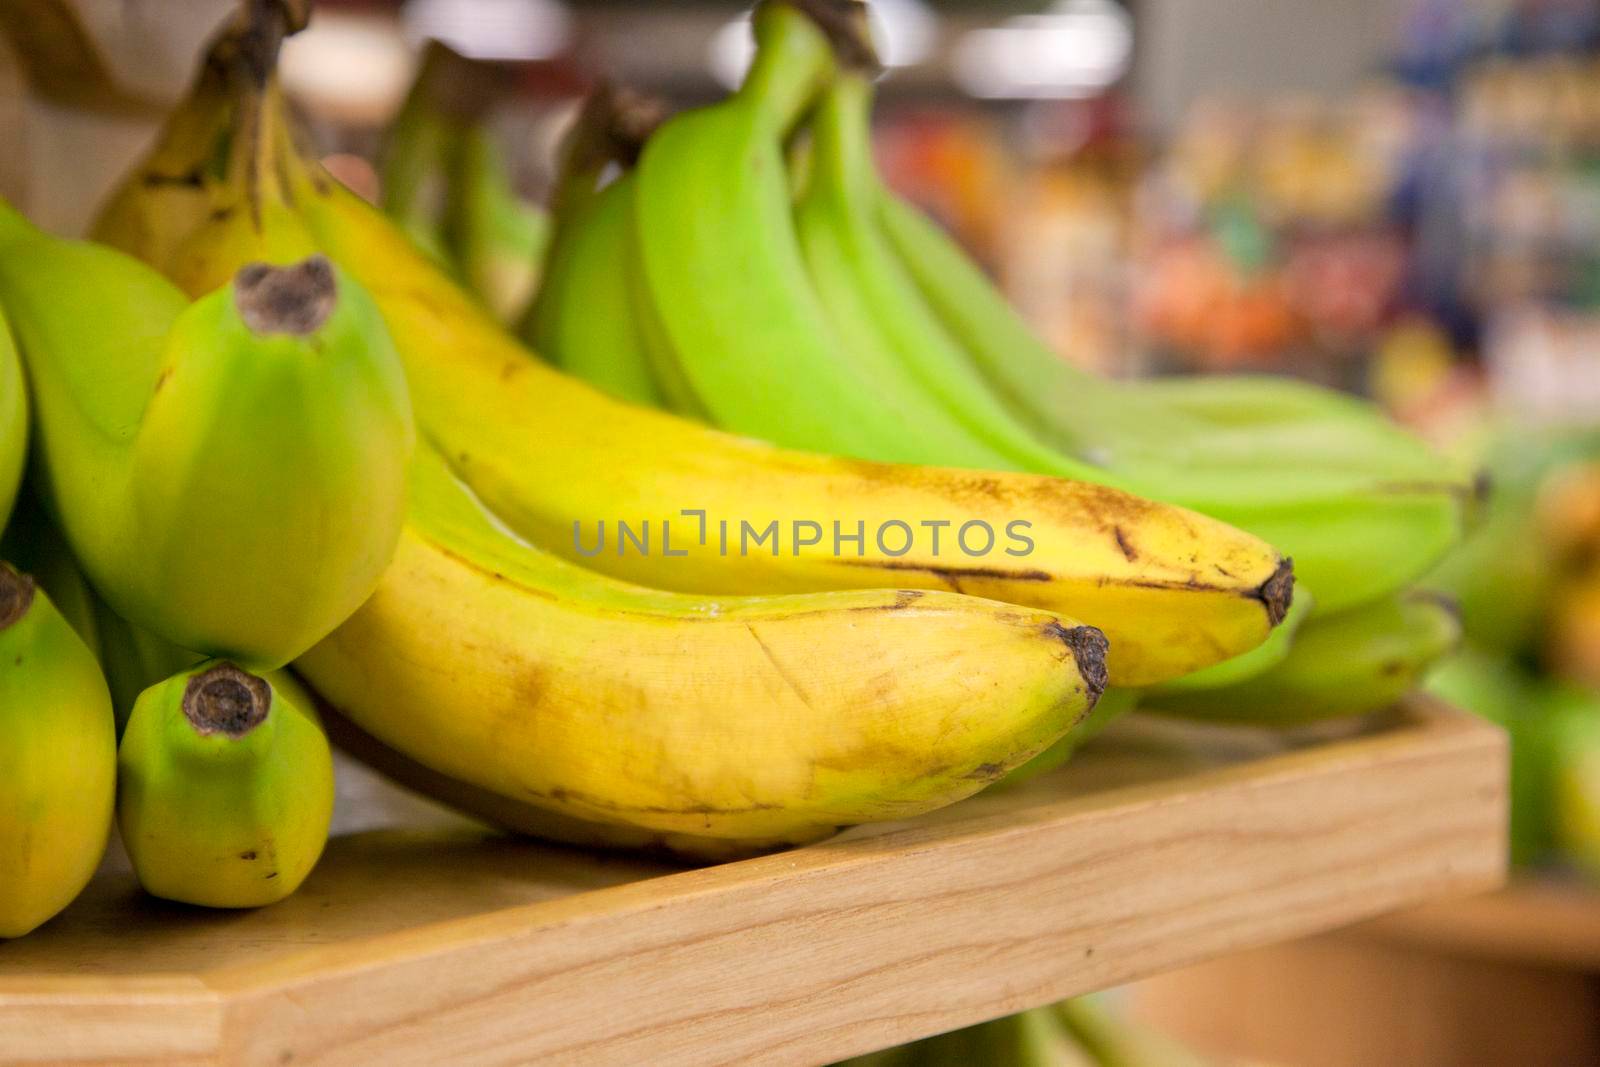  bunches of imperfect yellow and green bananas, in a store on a shelf 